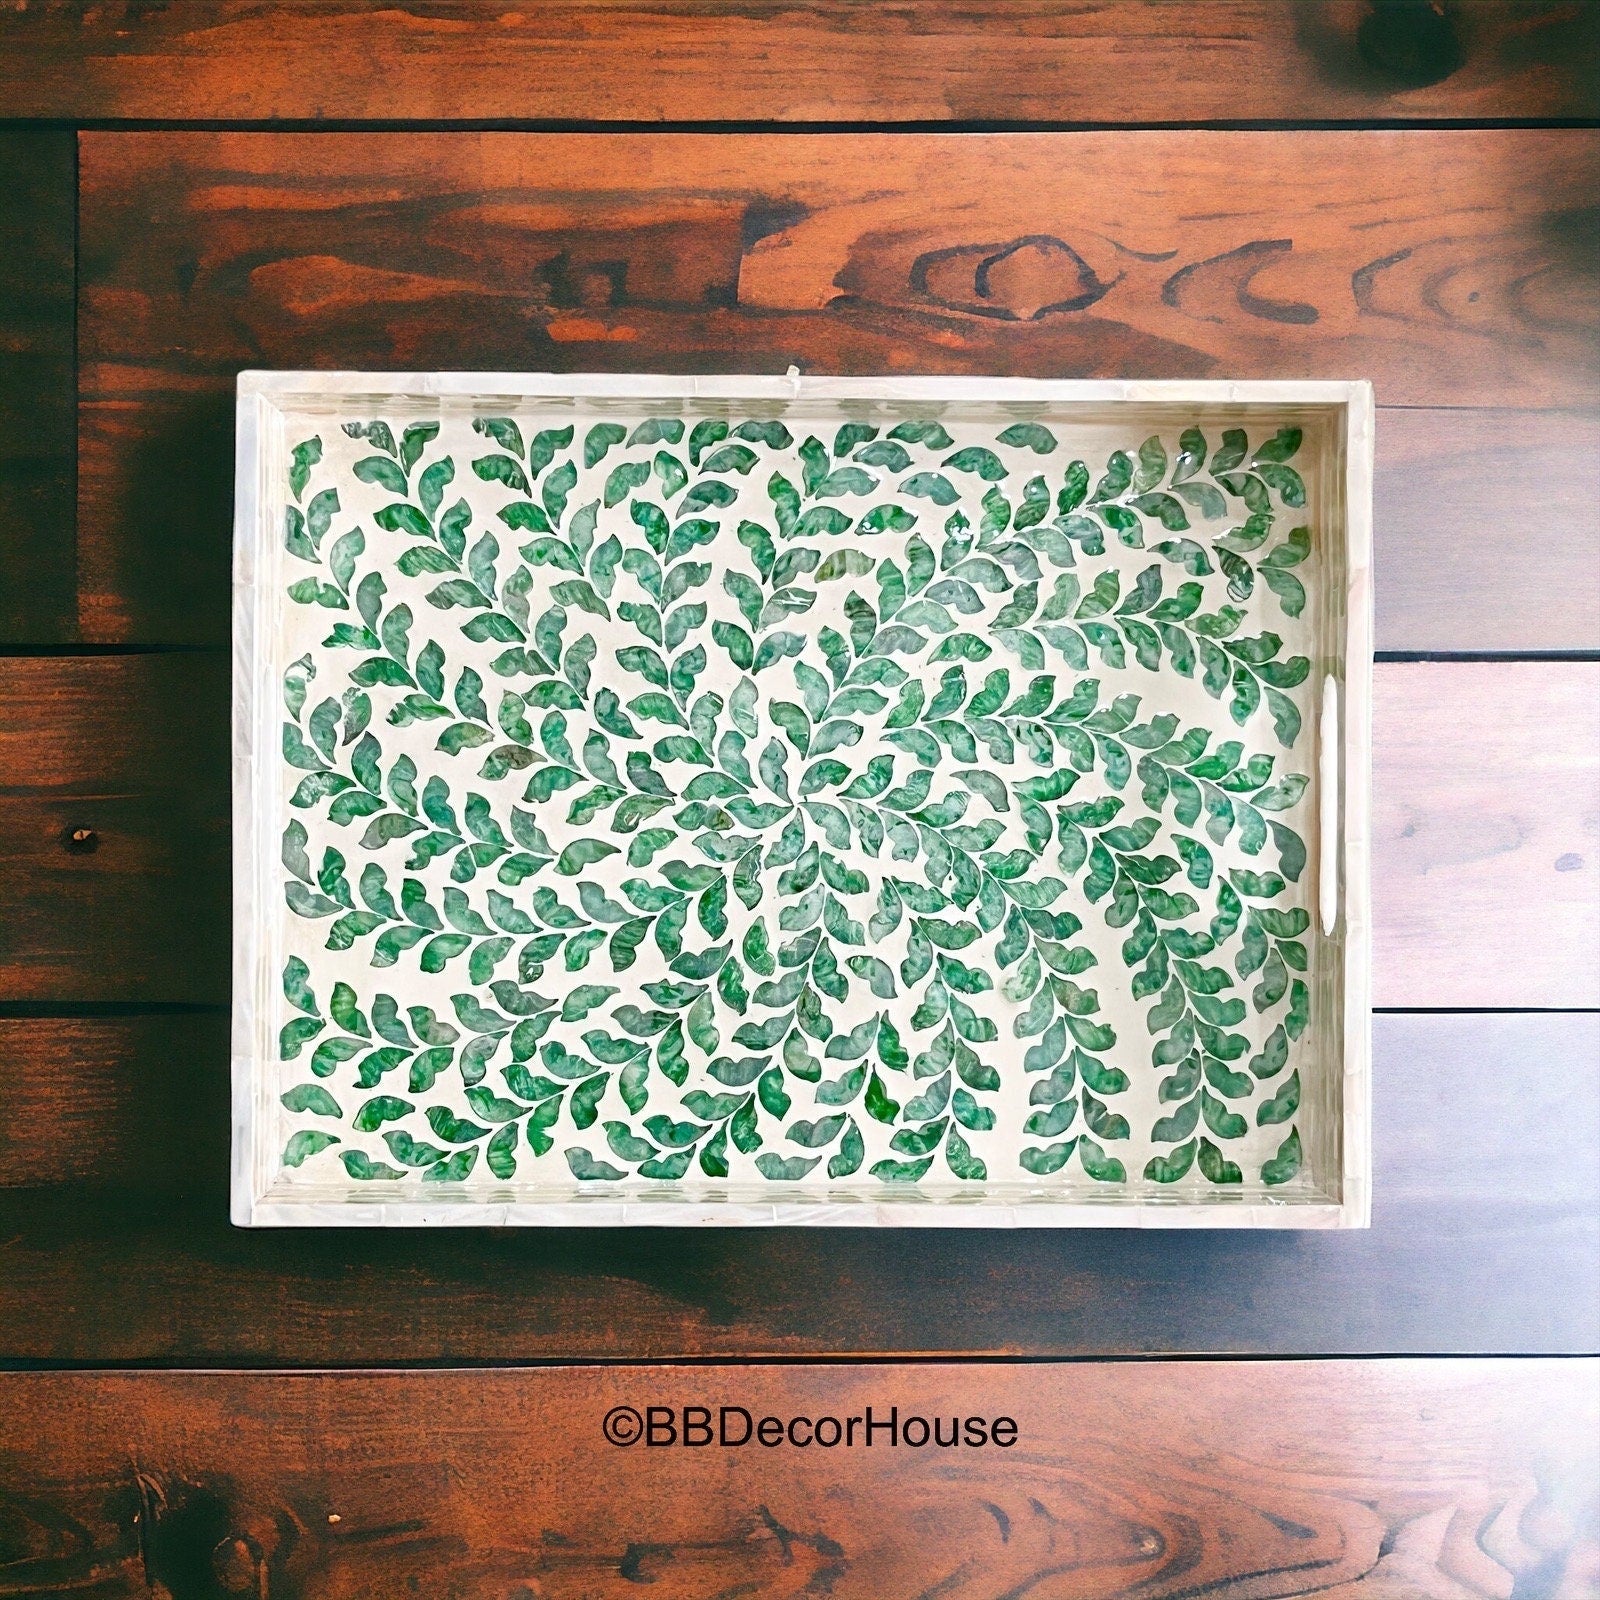 Mother of Pearl Rectangular Serving Tray, Green Leaves PatternBBDecorHouseSize S